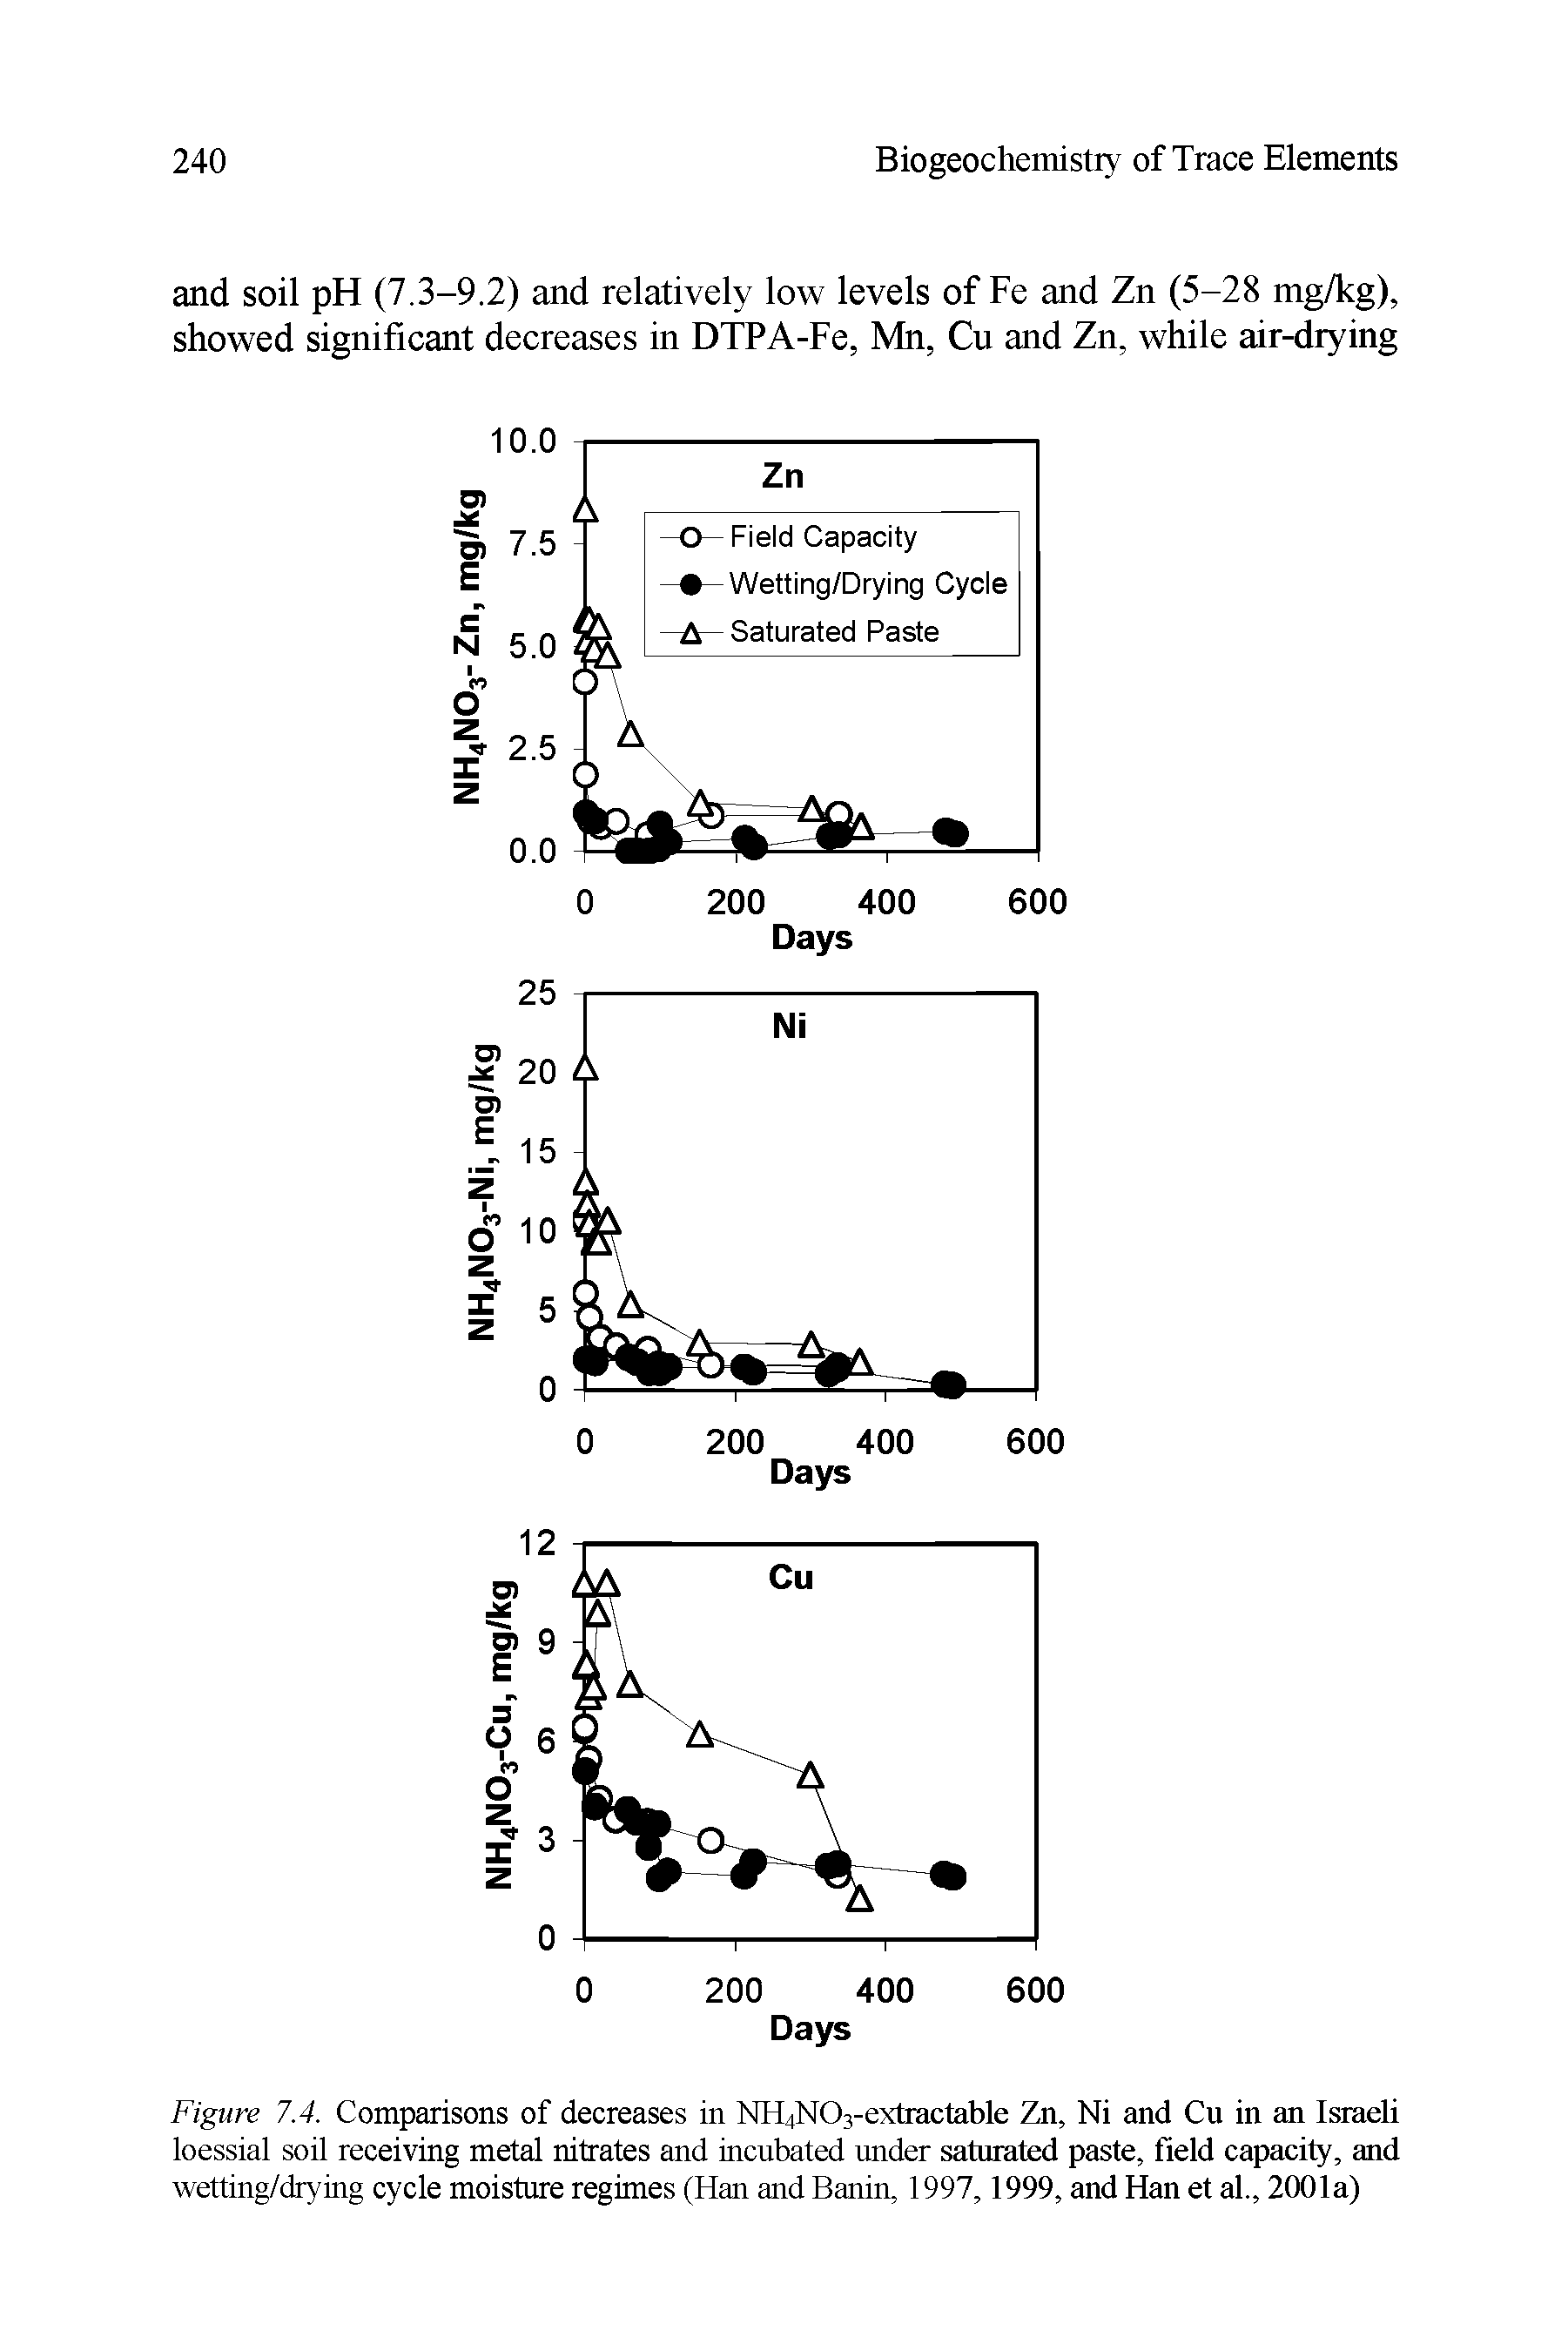 Figure 7.4. Comparisons of decreases in NH4N03-extractable Zn, Ni and Cu in an Israeli loessial soil receiving metal nitrates and incubated under saturated paste, field capacity, and wetting/drying cycle moisture regimes (Han and Banin, 1997,1999, and Han et al., 2001a)...